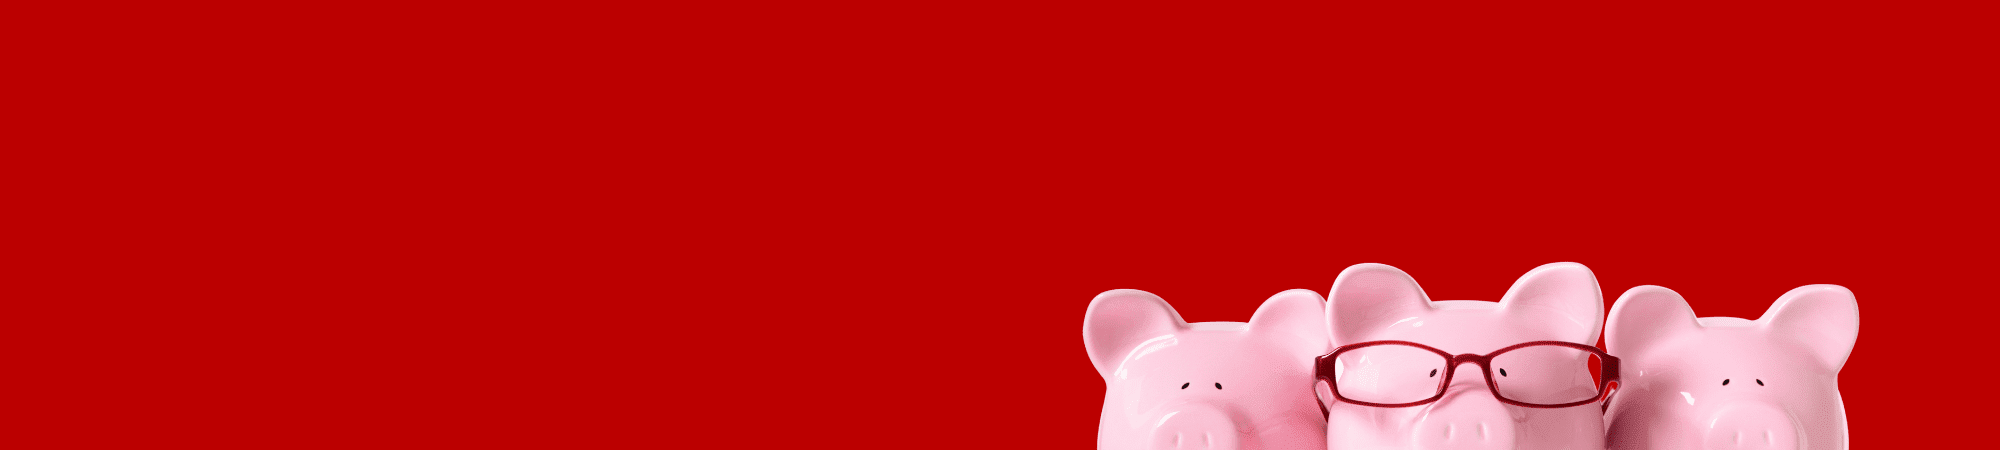 Red banner with pink pigs 